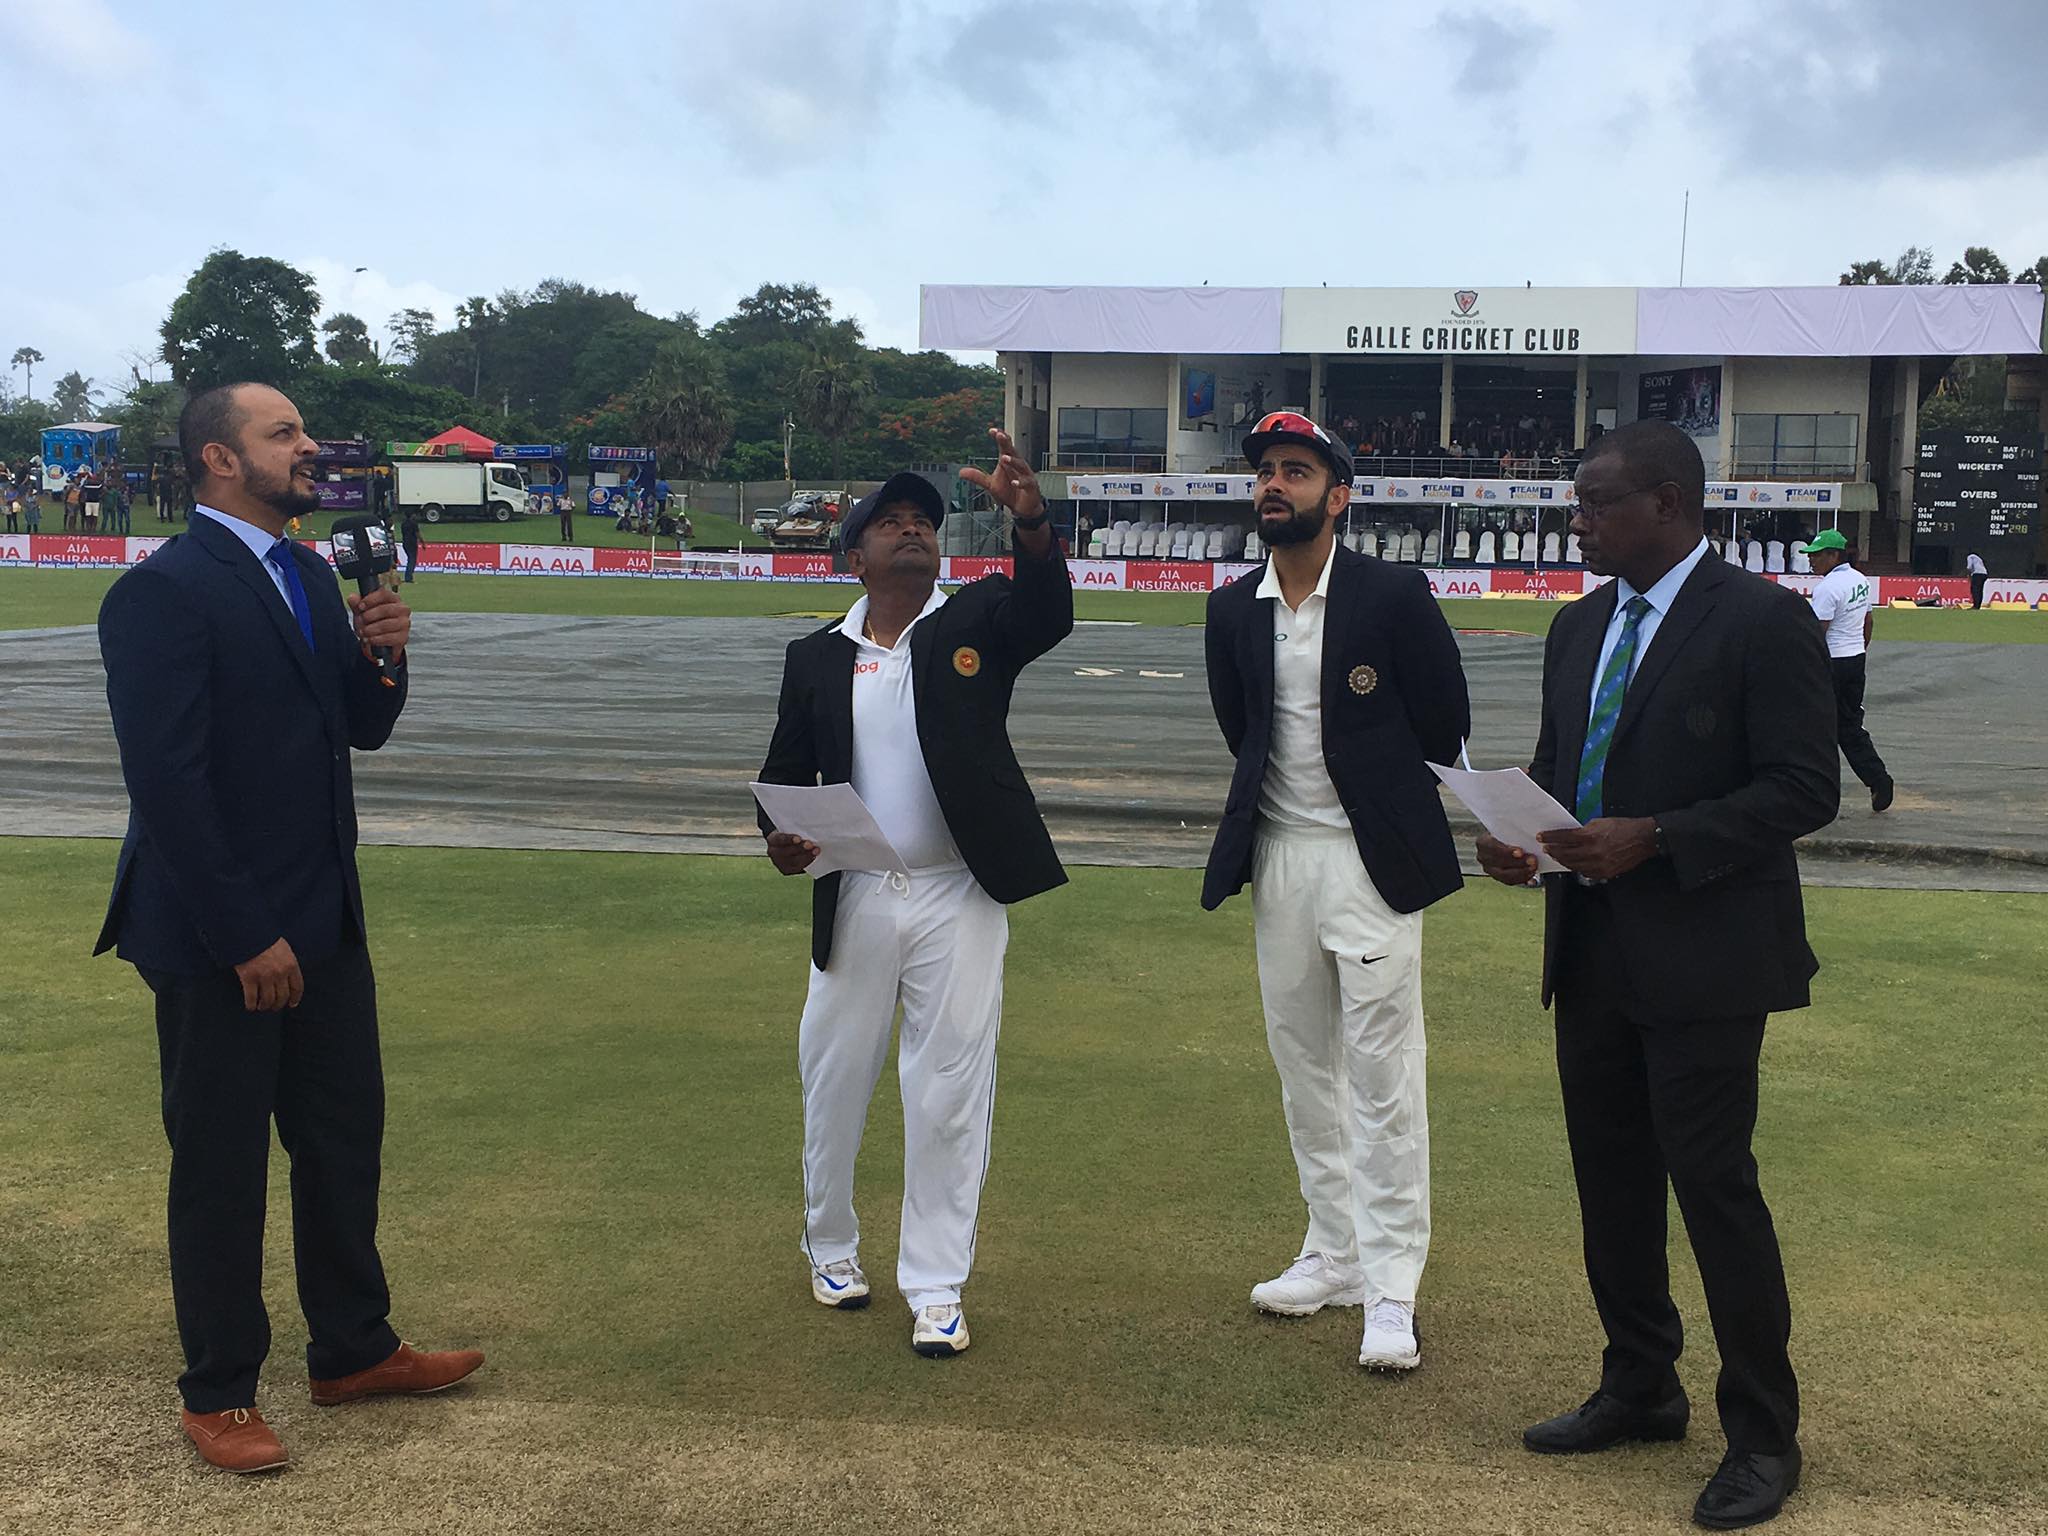 idnia win the toss in galle